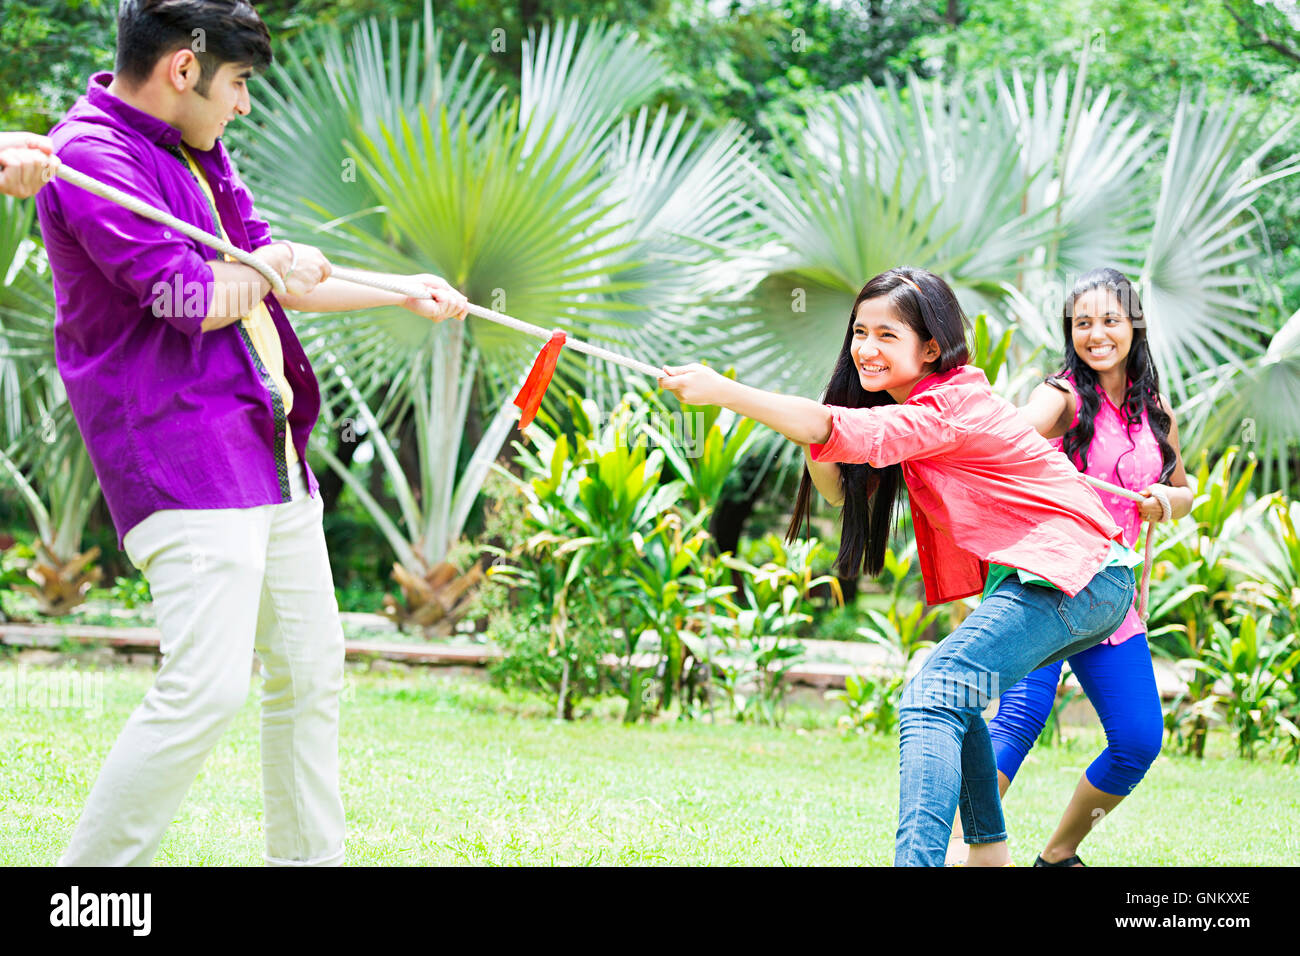 3 Young Girls and Boy Friends park Fun Playing Tug of war Stock Photo